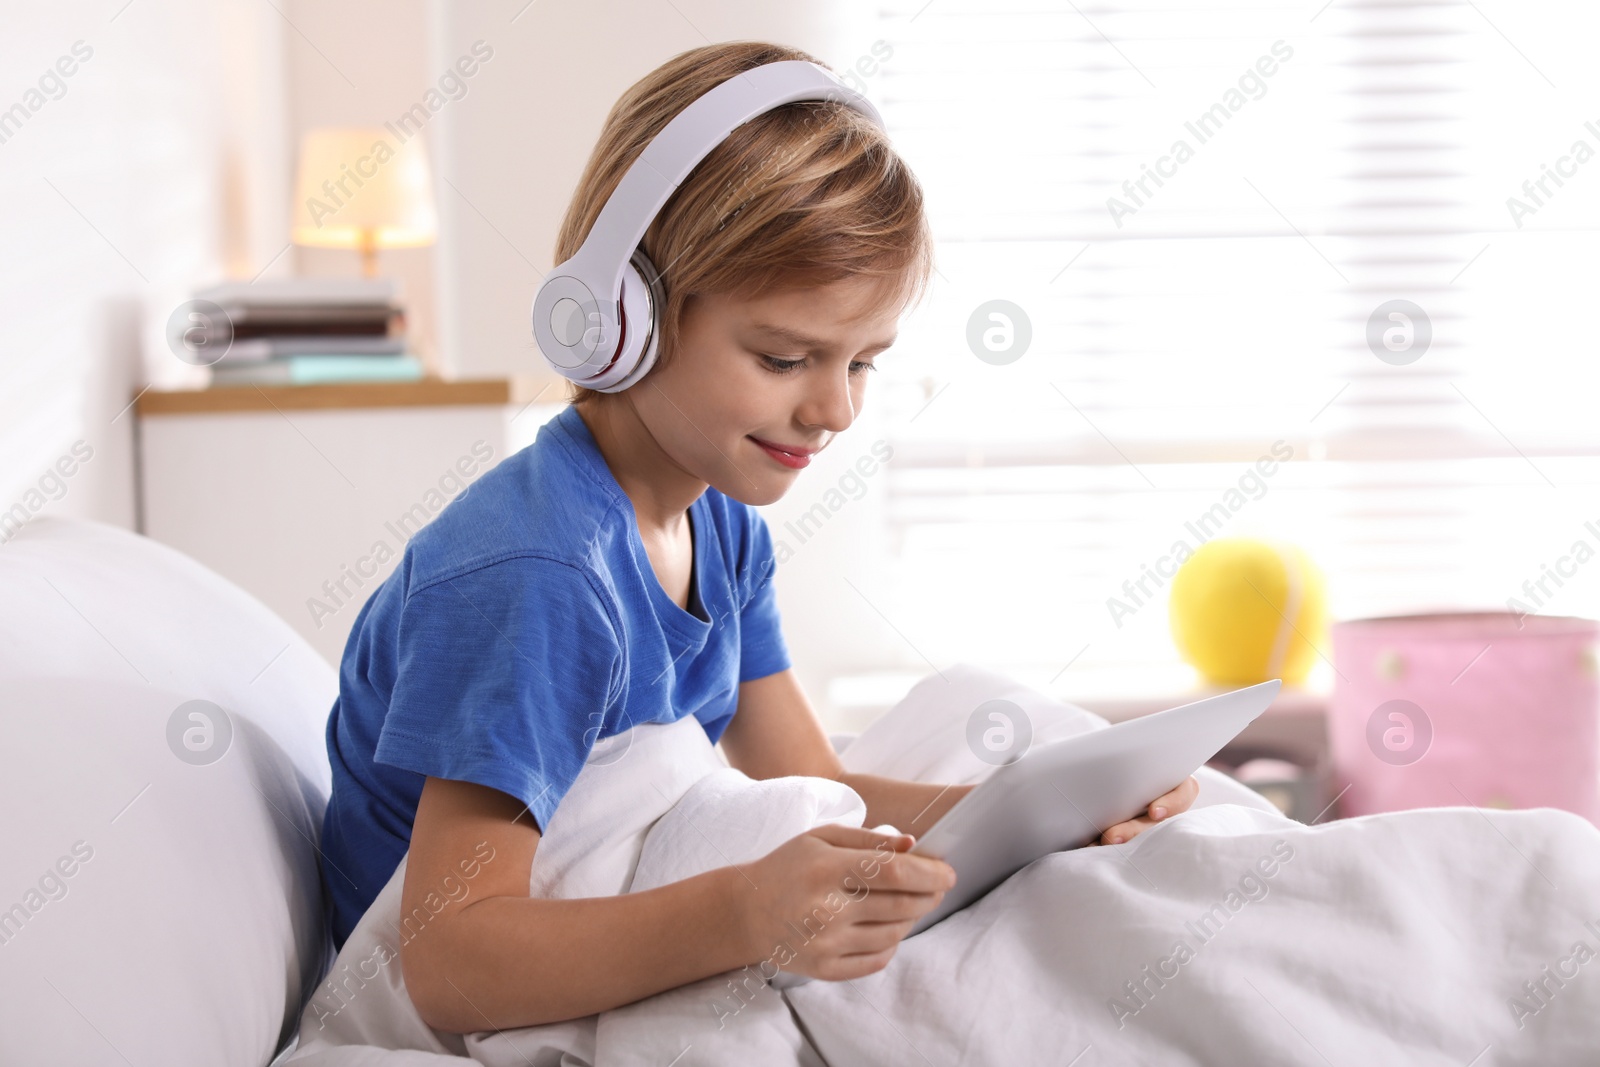 Photo of Cute little boy with headphones and tablet listening to audiobook in bed at home